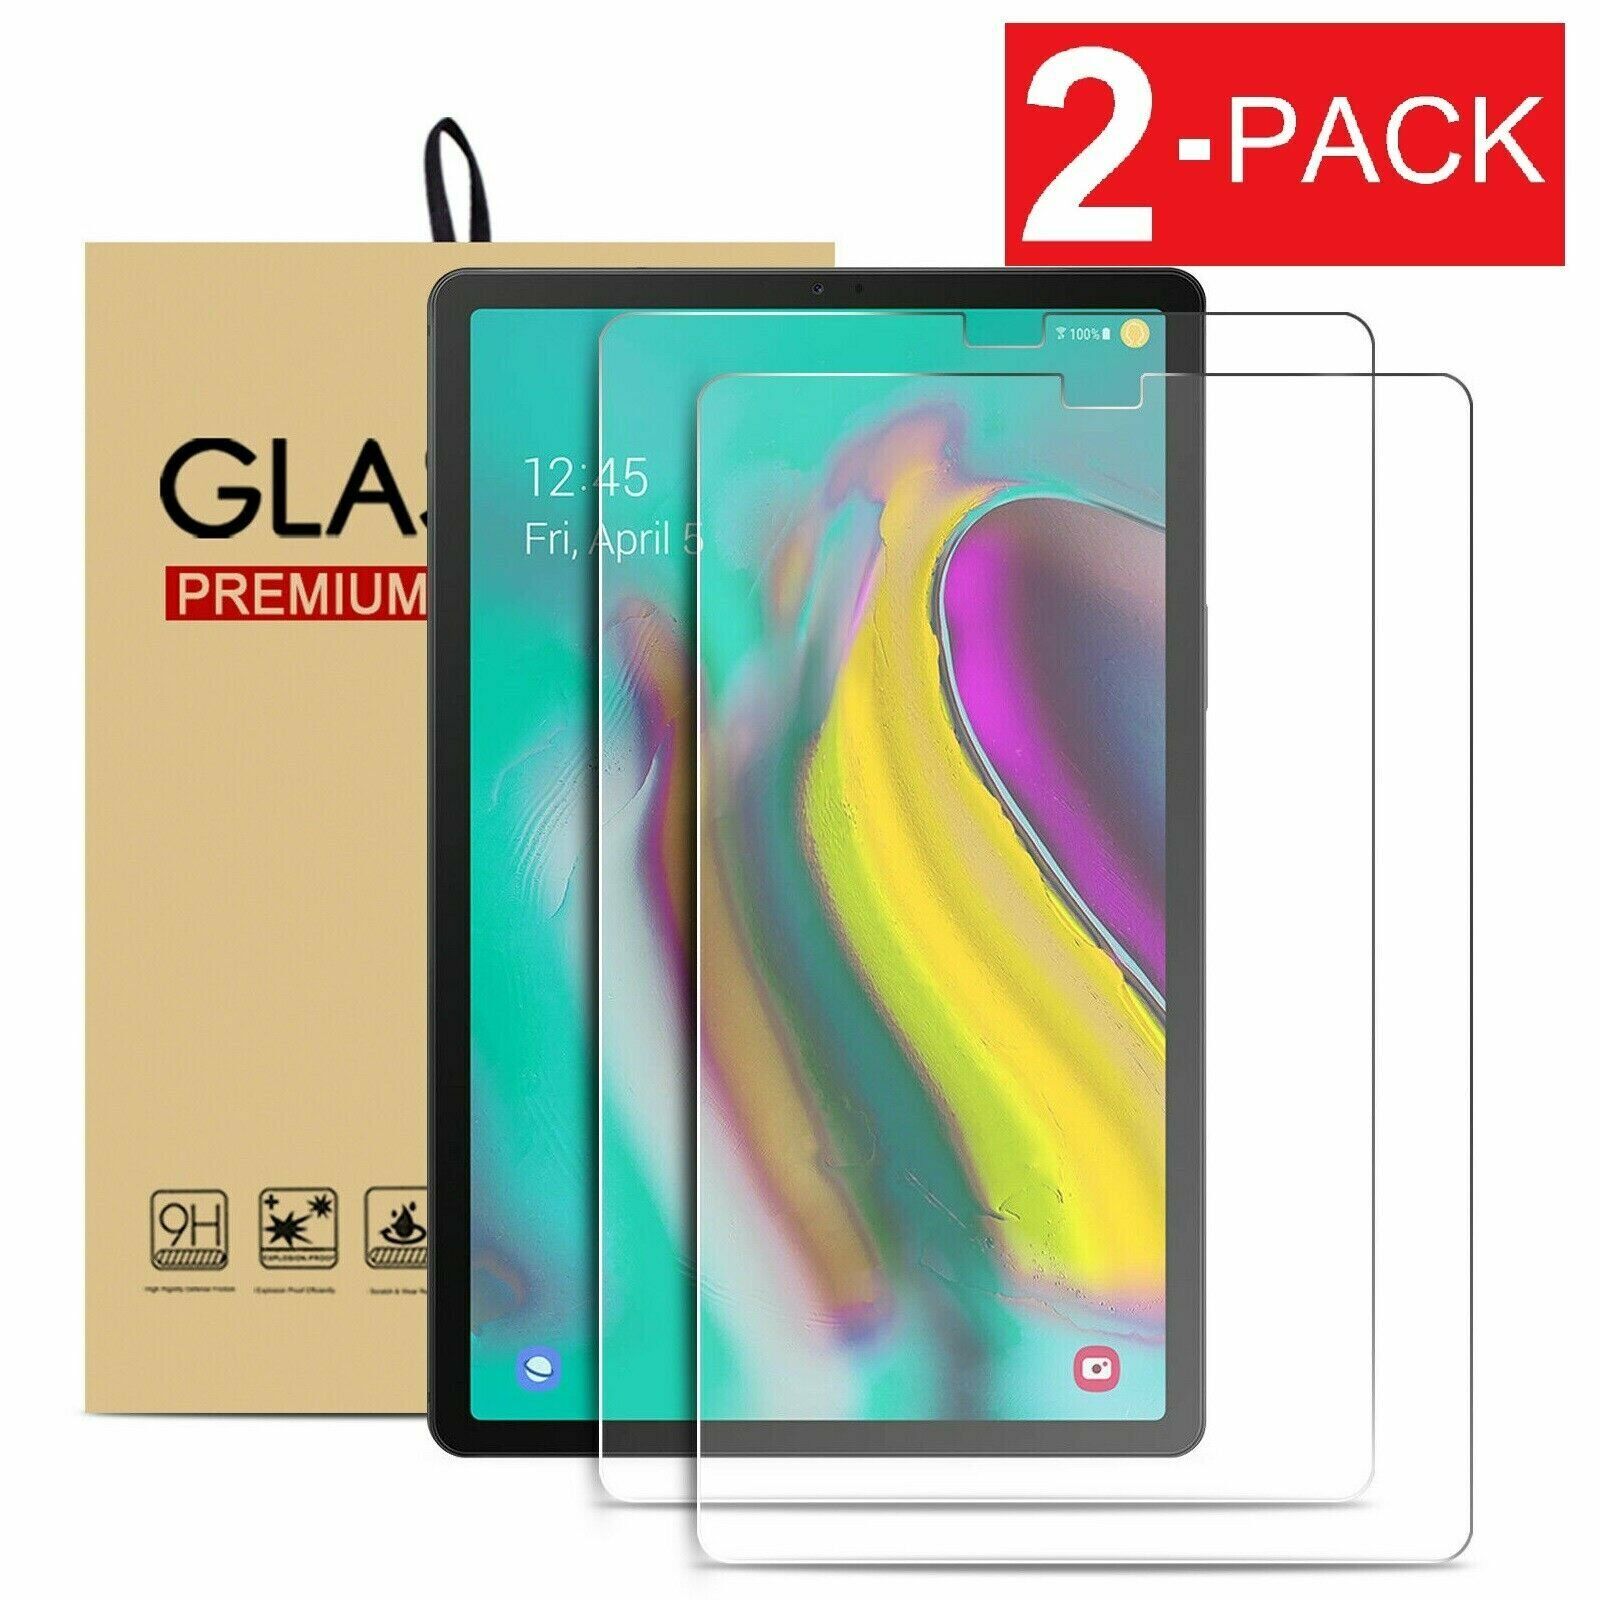 2 Pack Tempered Glass Screen Protector for Samsung Galaxy Tab S5e / Tab S6 10.5